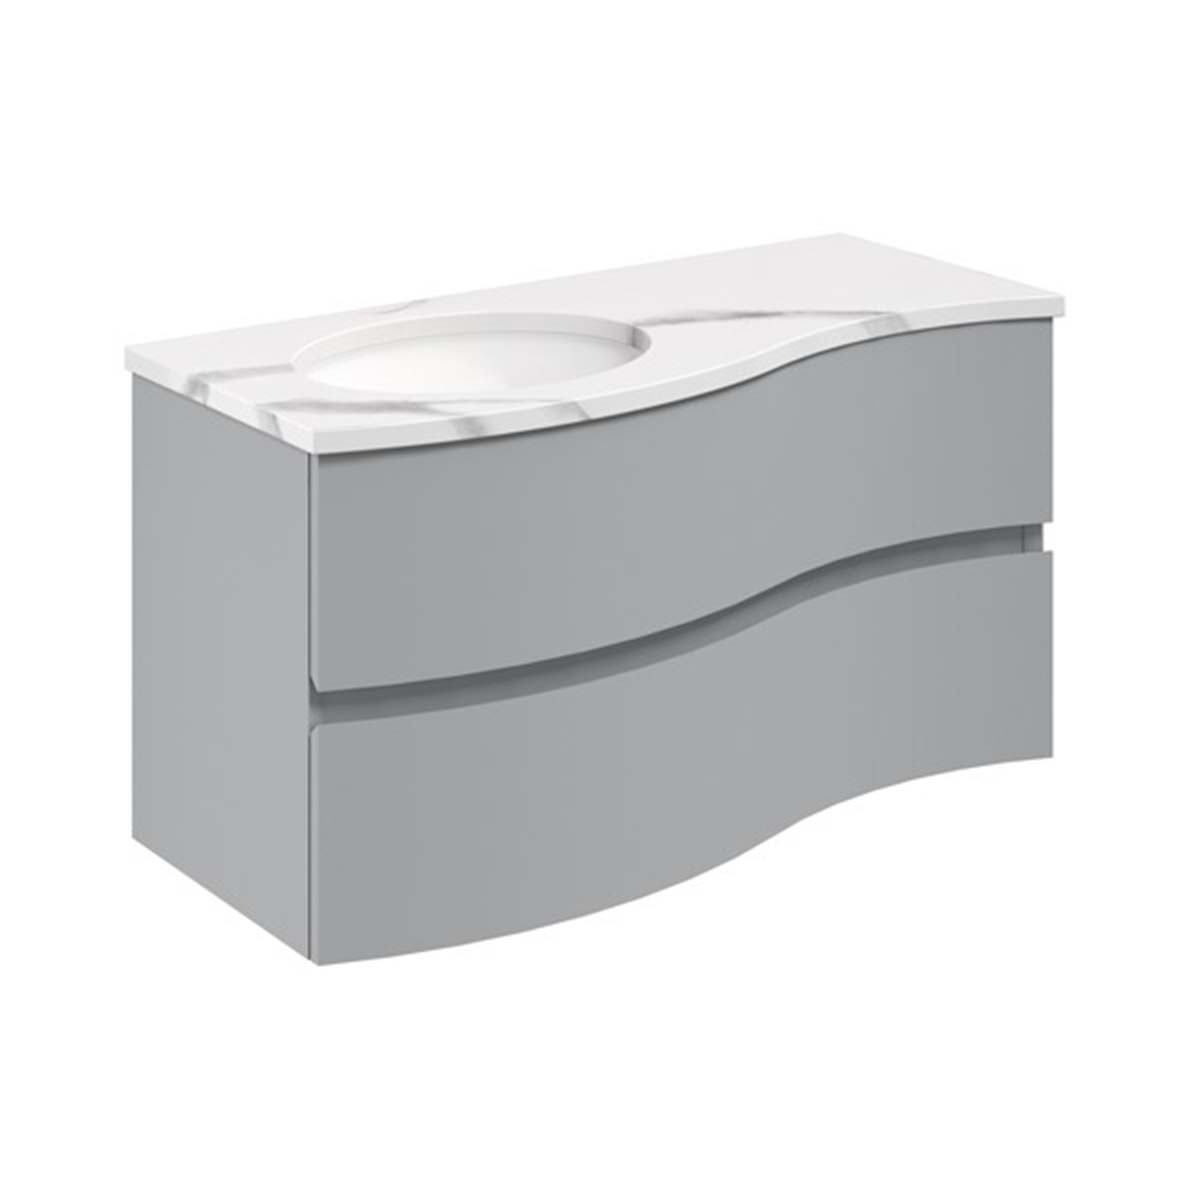 Crosswater Svelte 1000mm Double Drawer Wall Hung Vanity Unit With Calcutta Marble Effect Basin Storm Grey